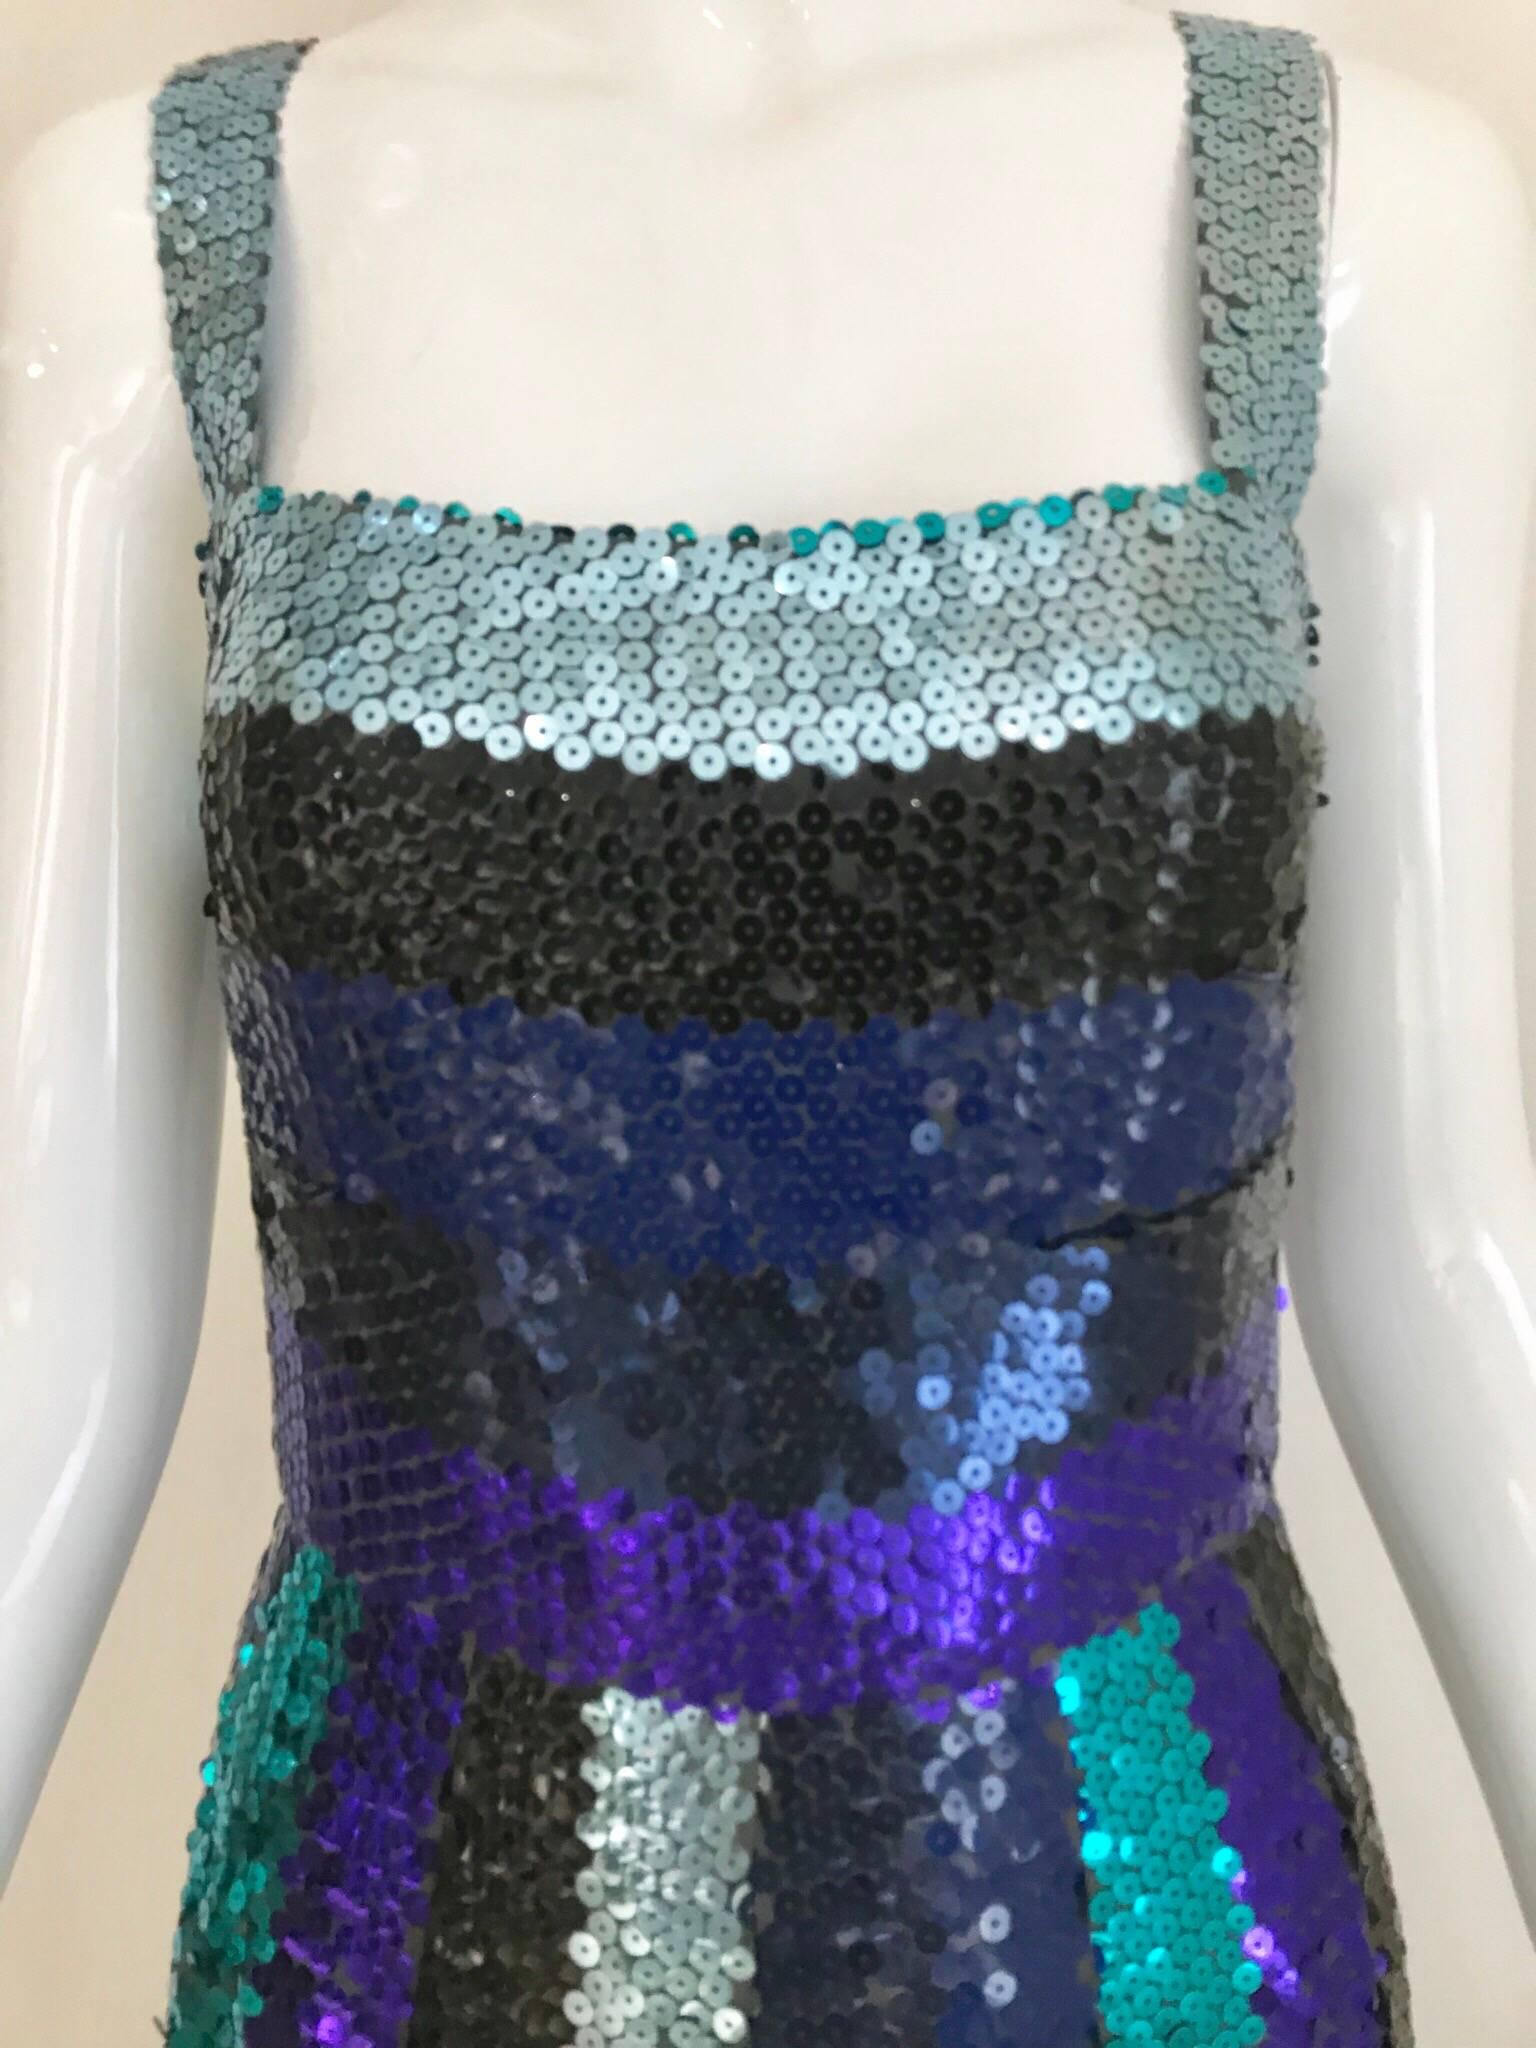 Beautiful Vintage Givenchy late 60s cobalt blue,green and purple spaghetti strap cocktail dress completely covered in hand stitched sequins. Very flattering fit with nipped waist and sort of flair skirt. Fun party dress! Perfect for Birthday party